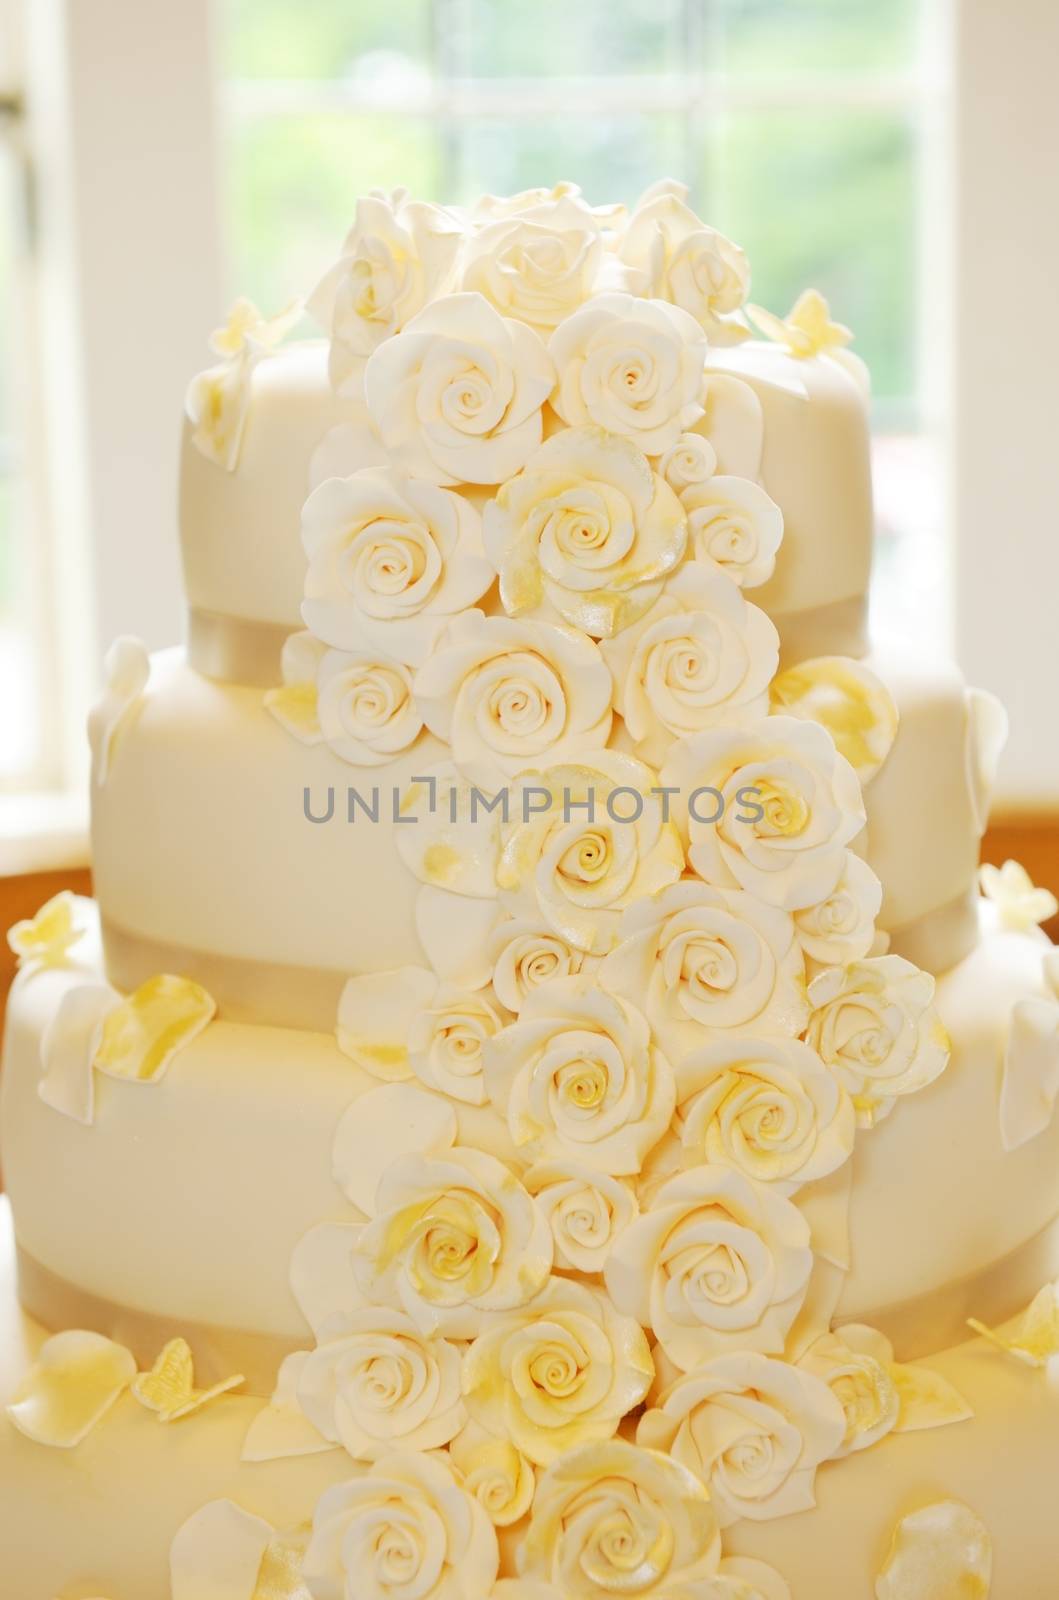 Wedding Cake Detail by kmwphotography